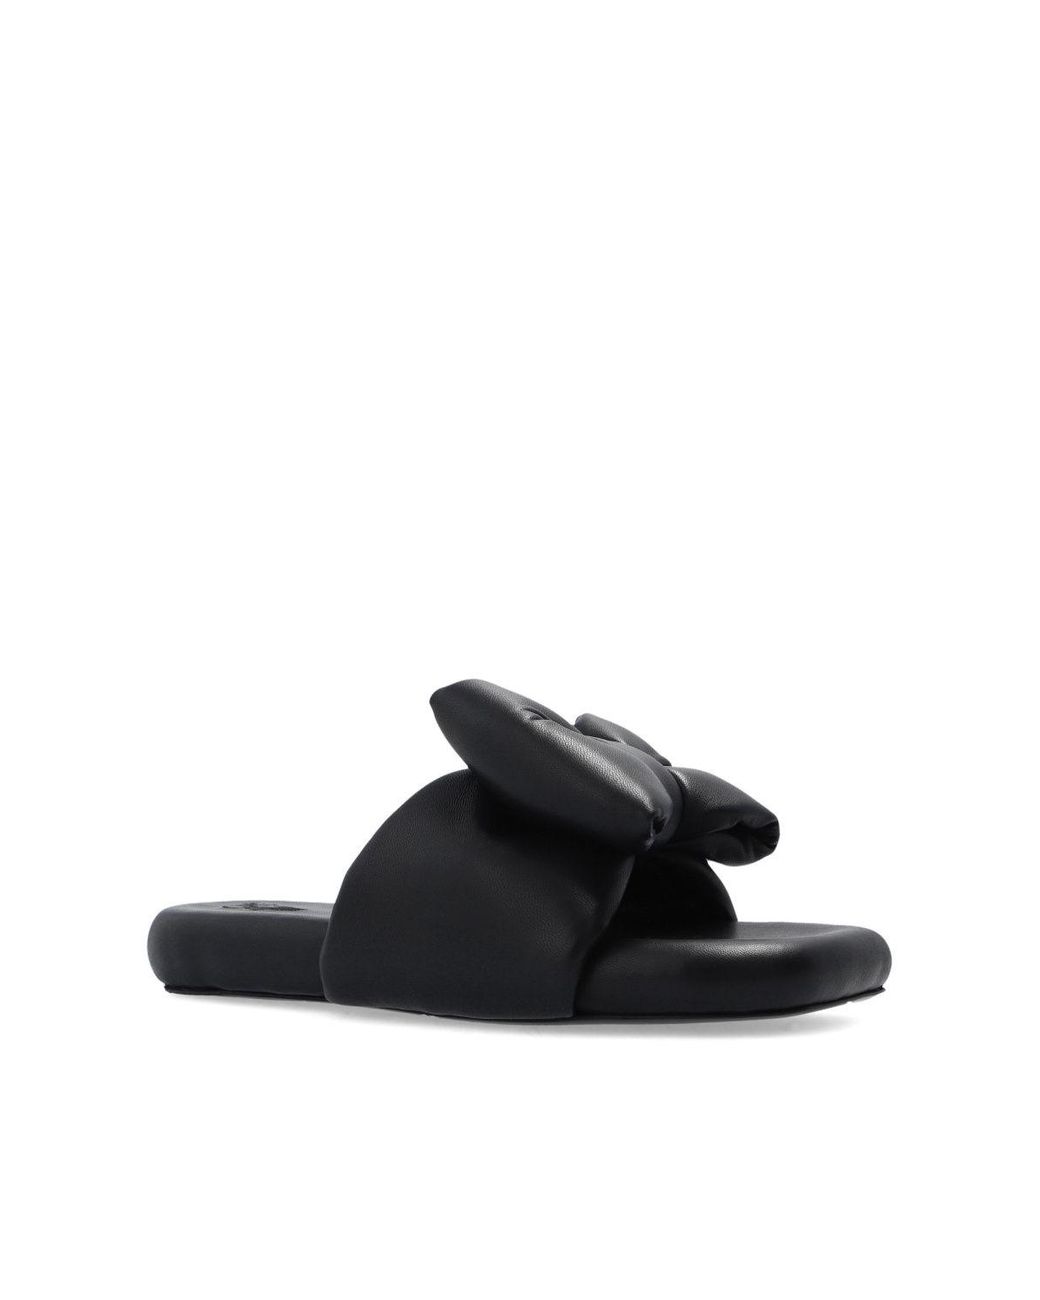 Off-White c/o Virgil Abloh 'extra Padded' Slides With Bow in Black 